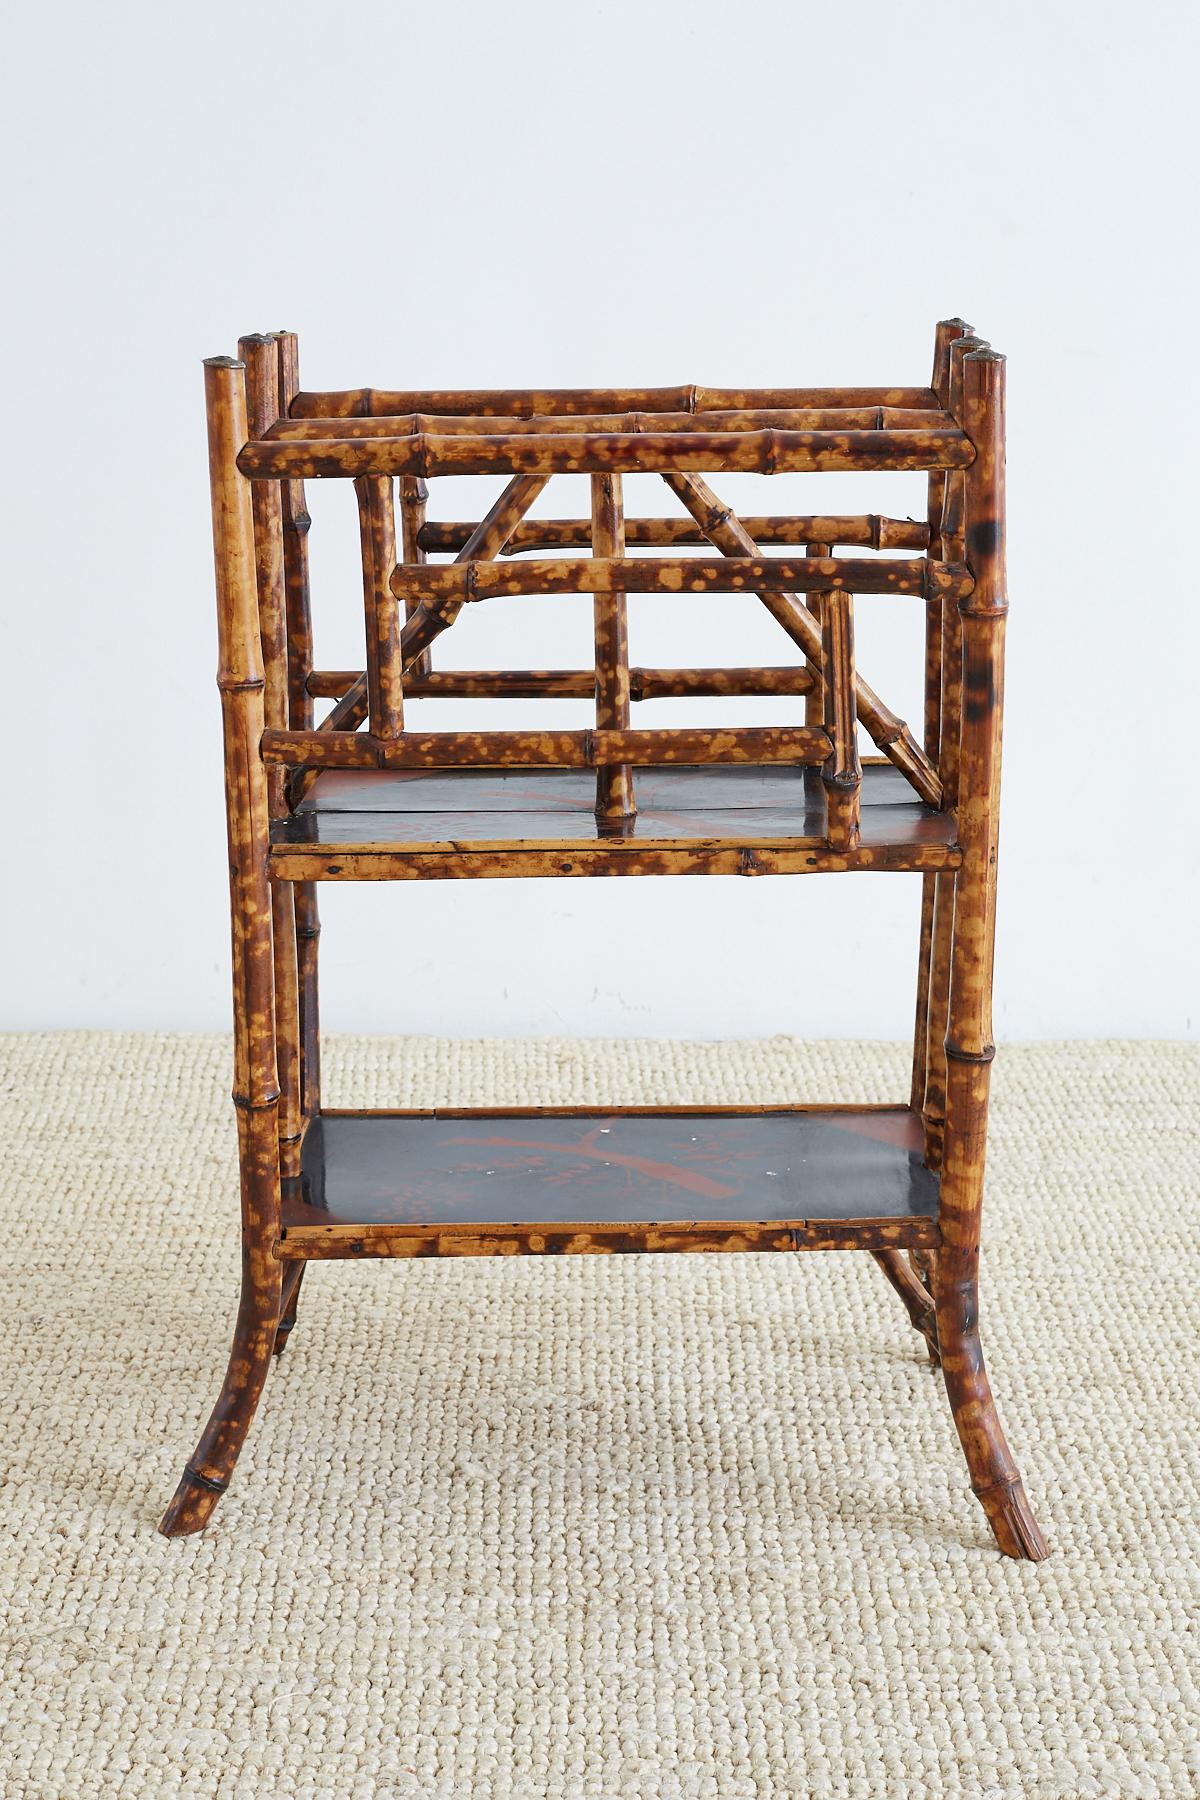 Large English bamboo Canterbury or magazine stand made in the chinoiserie revival taste of the early 20th century, Europe. Features a lovely lacquered tortoise shell finish with two painted tiers or shelves. The shelves have an Asian foliate motif.